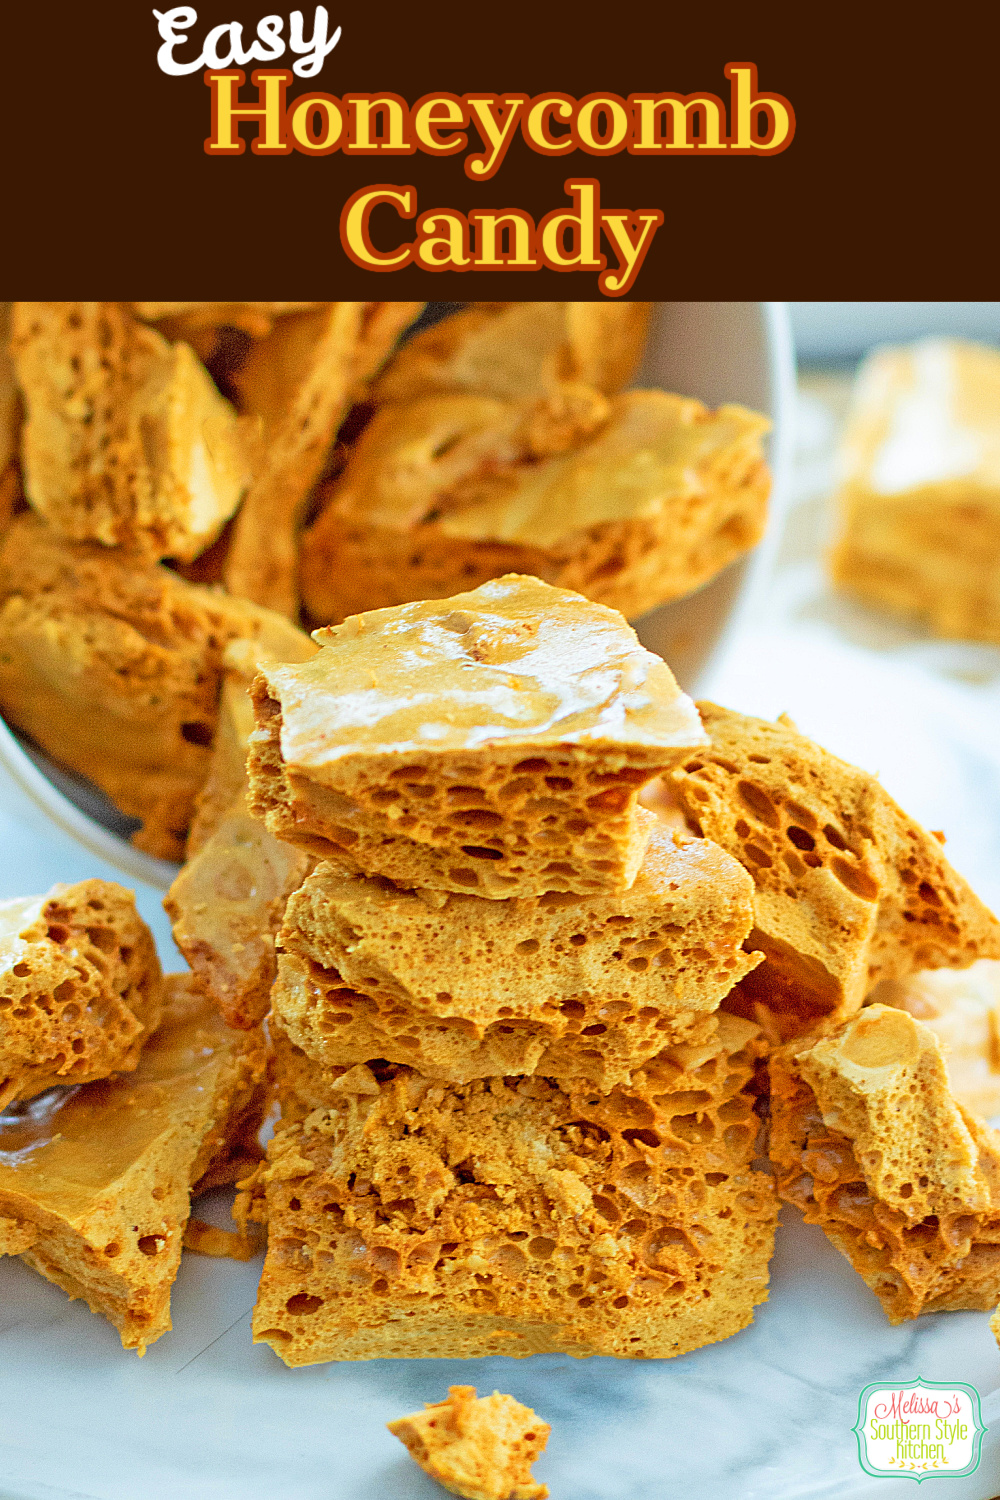 This crisp and airy Honeycomb Recipe is a deliciously simple candy to make #honeycomb #honeycombrecipe #honeycombcandy #candyrecipes #easycandyrecipes #candy #honeycandy #holidayrecipes via @melissasssk